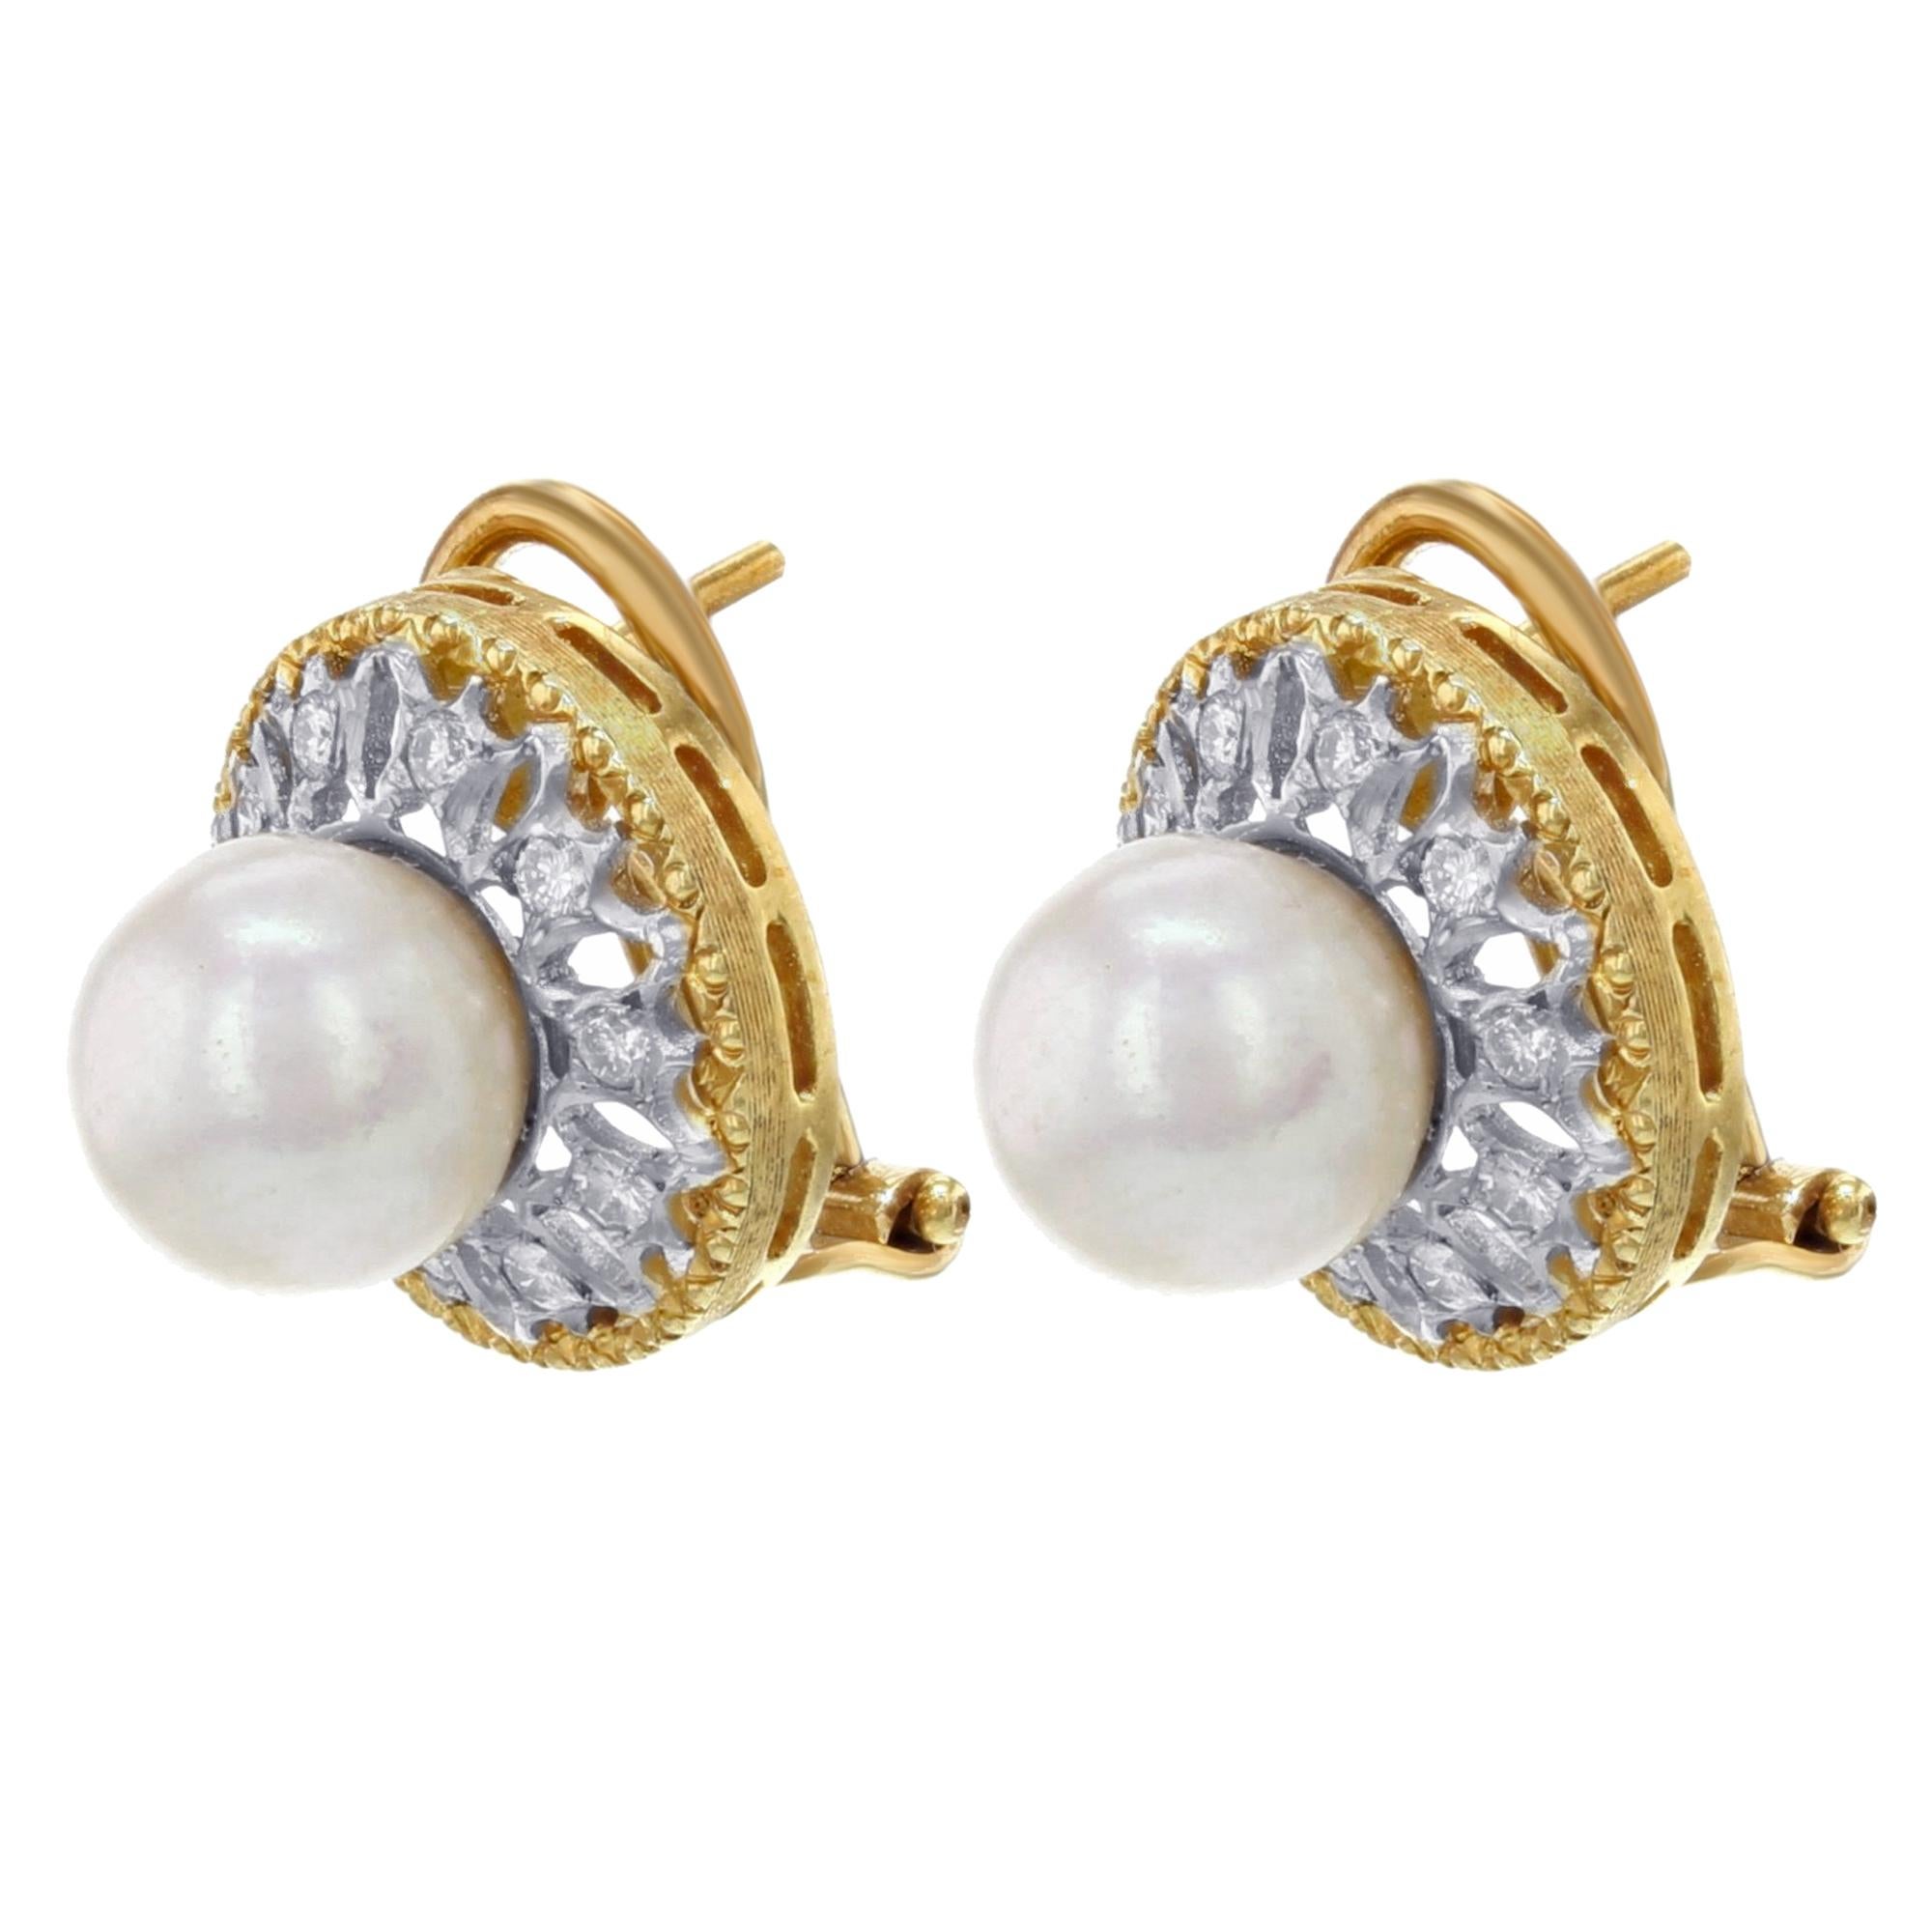 Saya 18k Yellow & White Gold 0.4 Cttw Diamonds & Pearl Huggie Ladies Earrings

These earrings are new and made of 18k yellow & white gold and encrusted with 0.4 cttw diamonds. 

Length of the ring is 15.6mm, total weight 10.6 g. 

The earrings comes